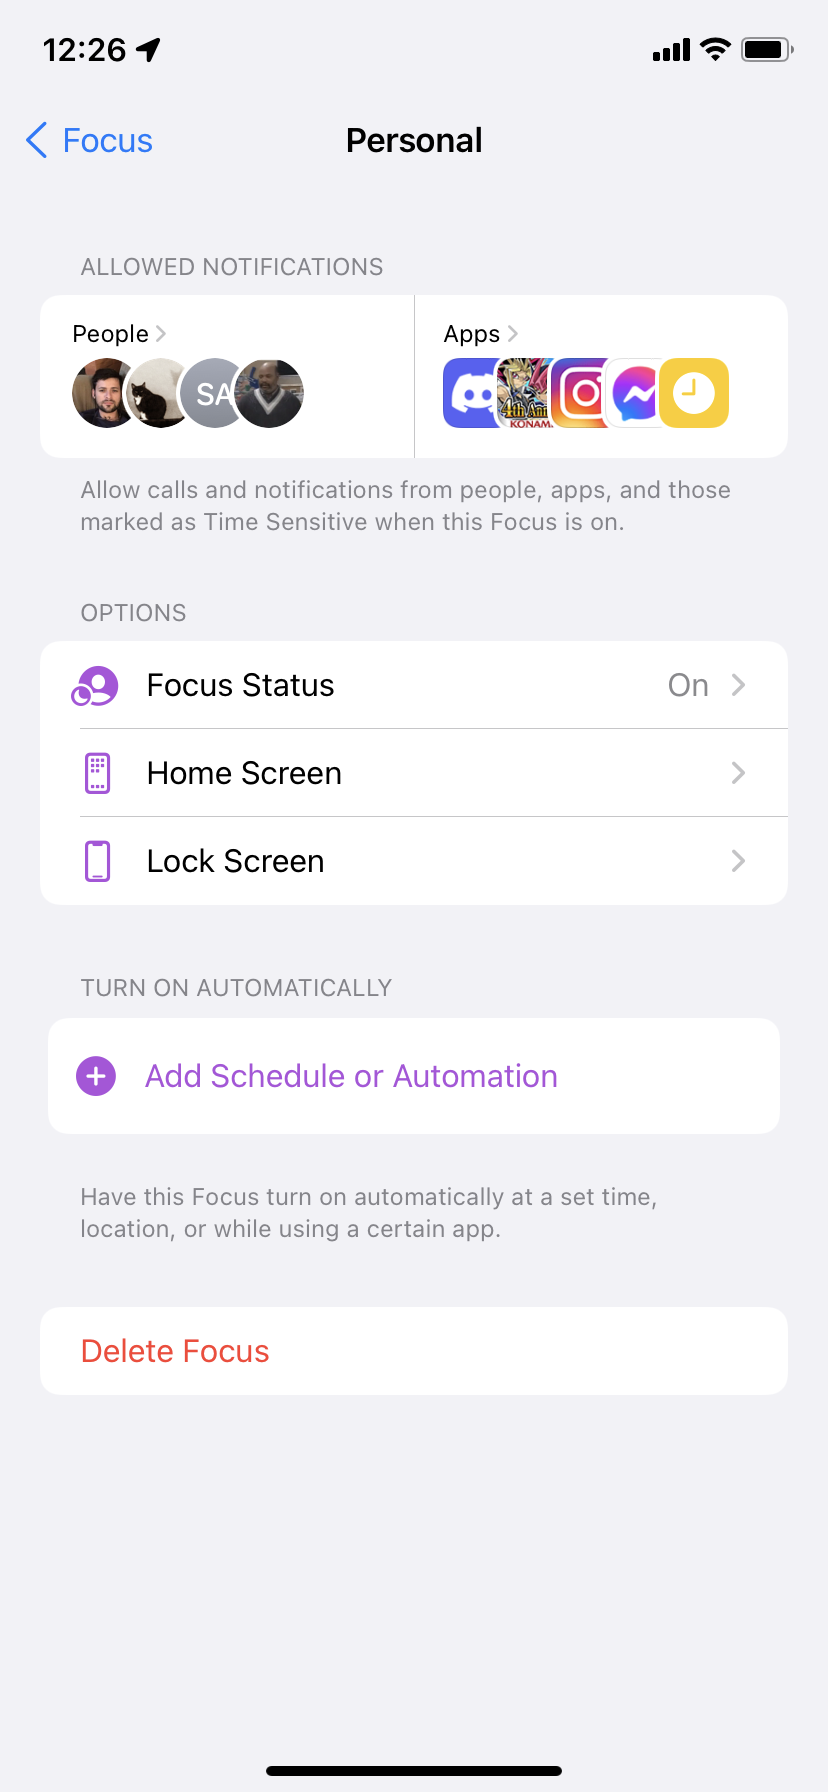 A Focus settings screen that lets you "Delete Focus" or change which apps and contacts are allowed.